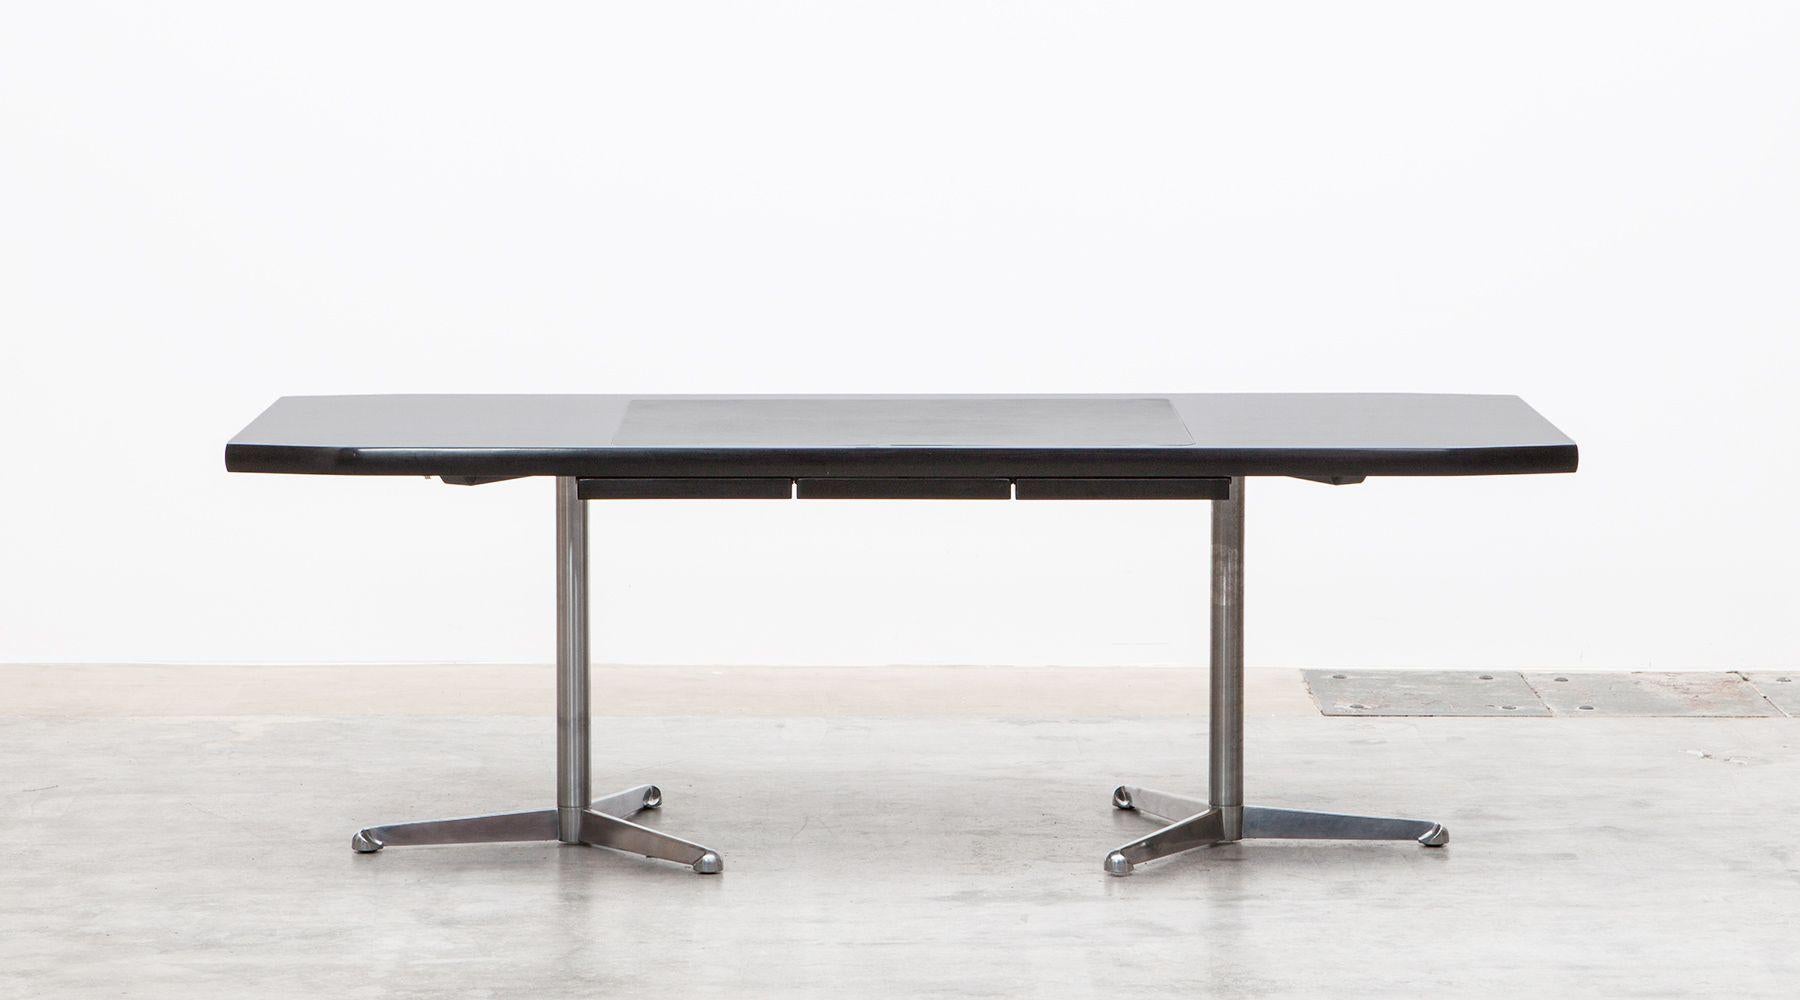 Beautiful Osvaldo Borsani writing desk with a high-quality leather writing surface area. This table is equipped with two chromed tubular steel tripod feet which is a great contrast to the dark wooden top which contains in the middle section three